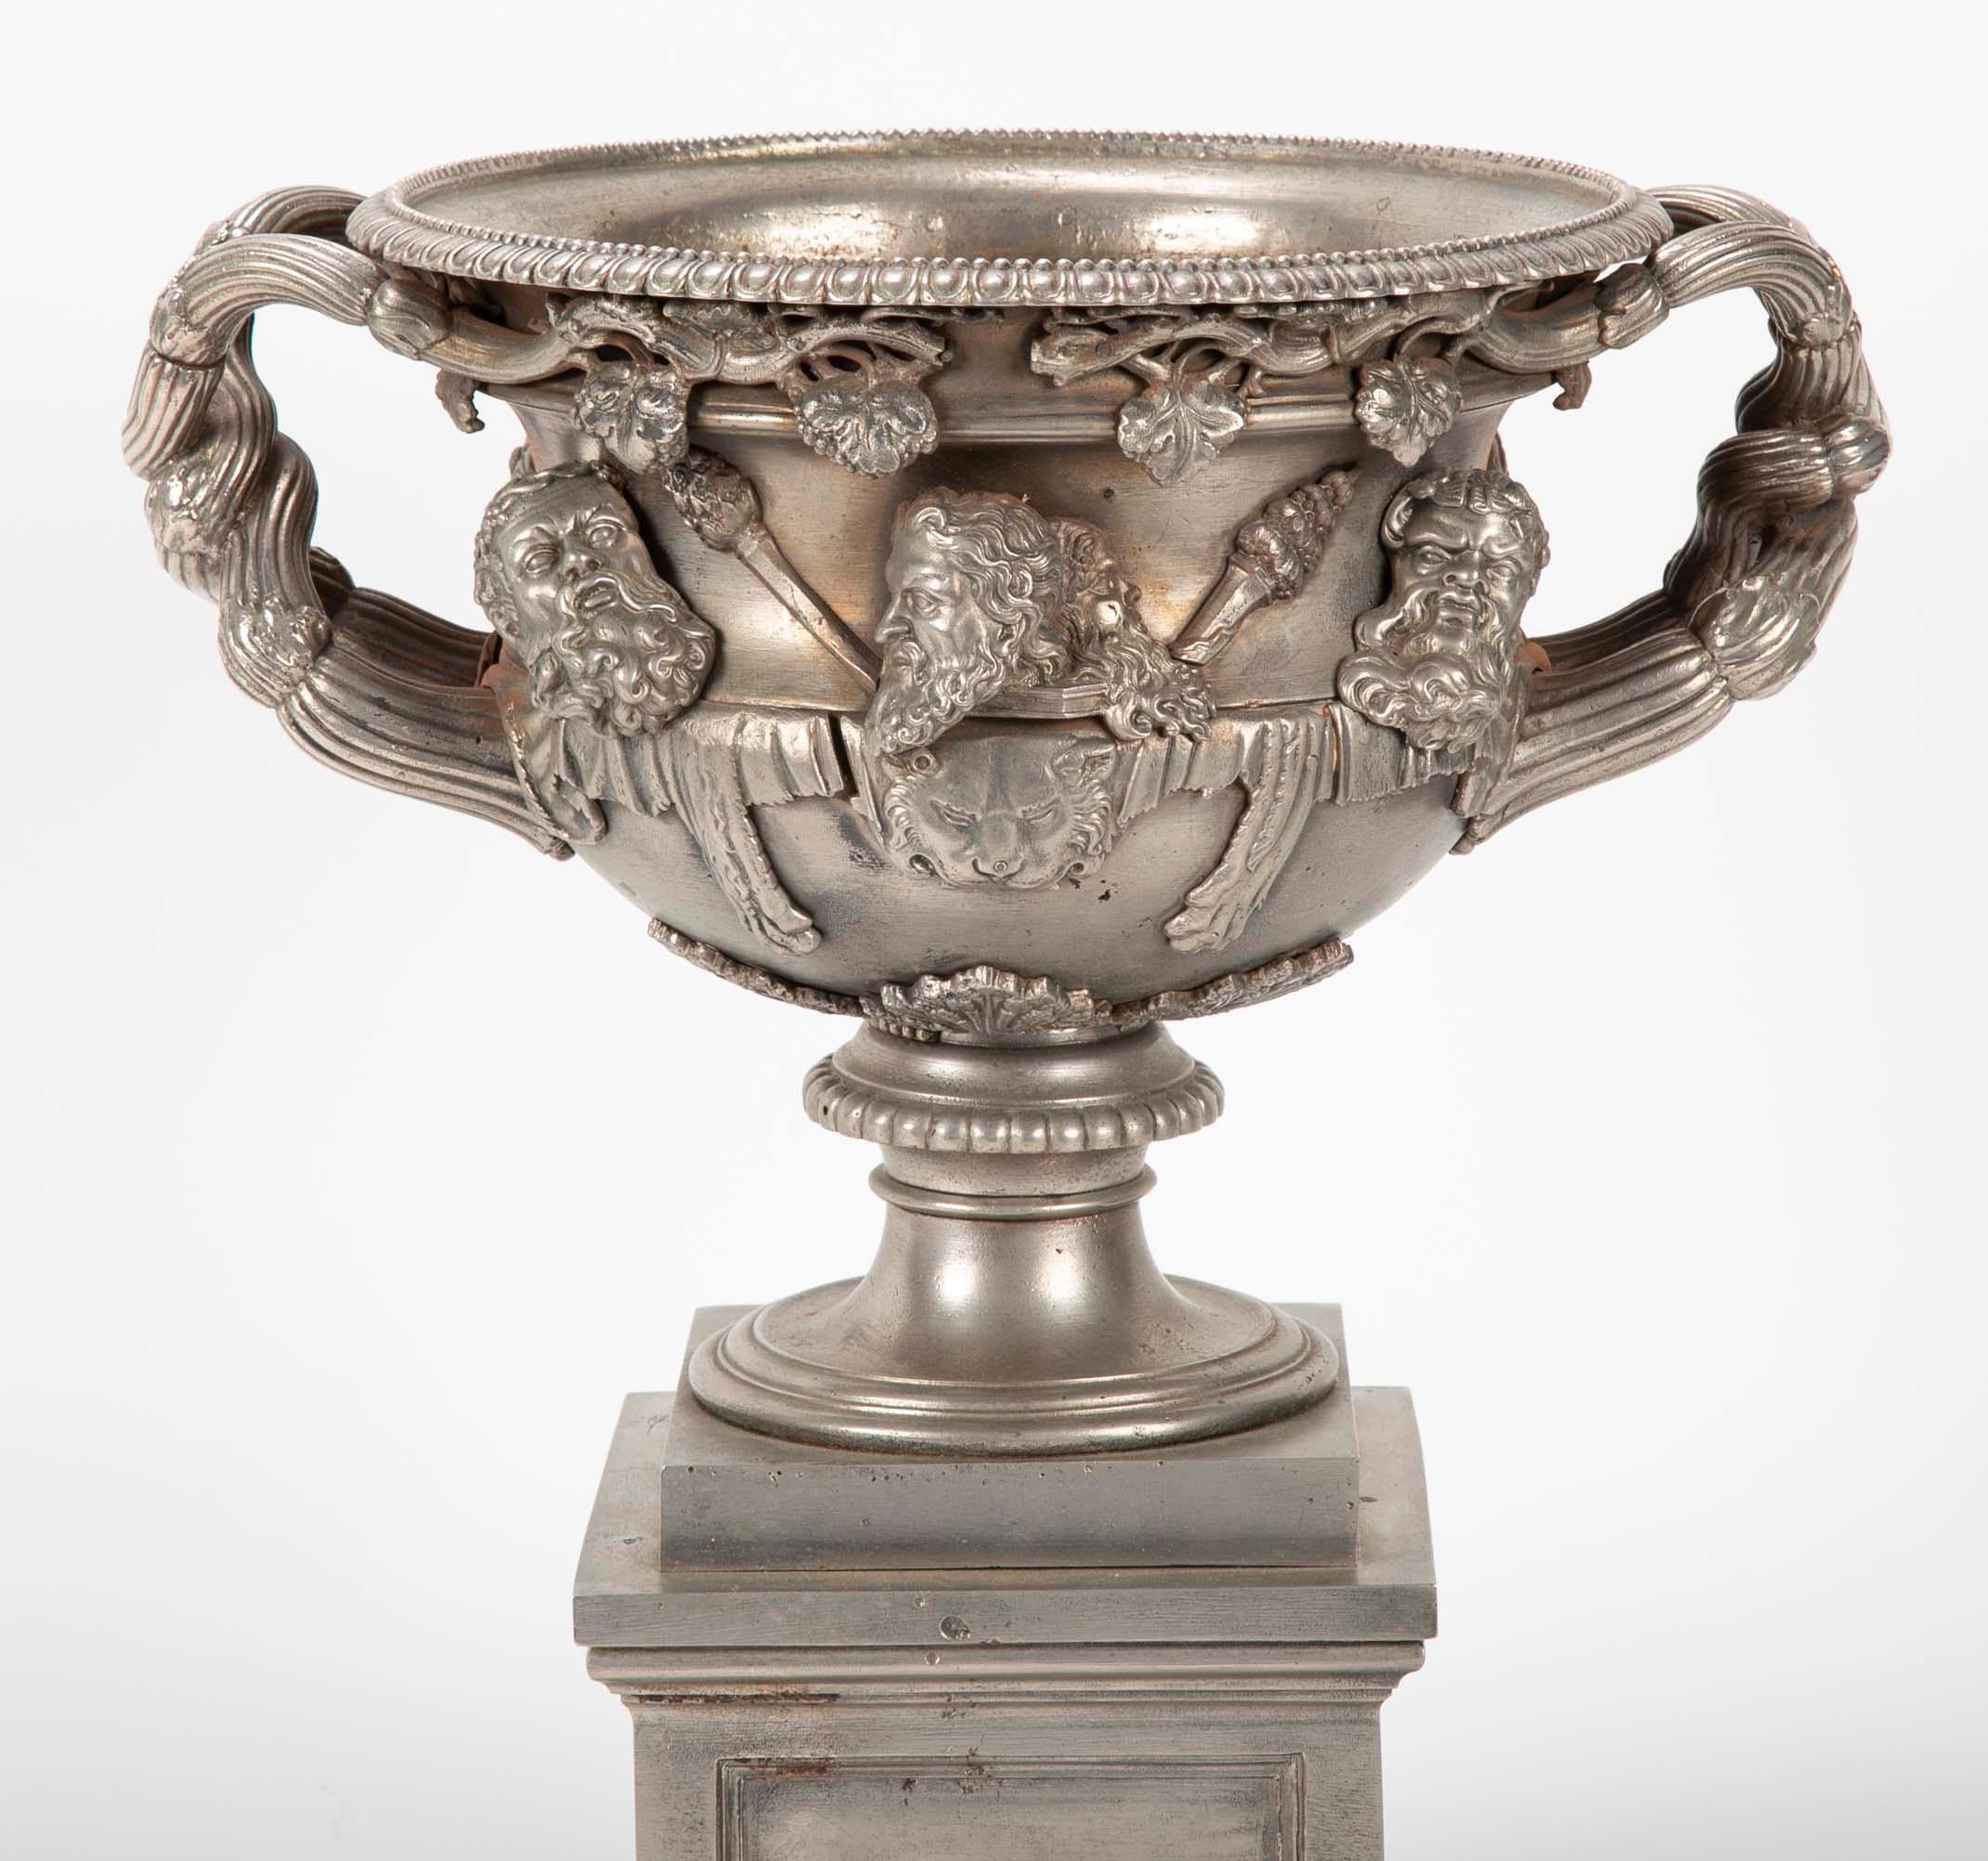 A fine and impressive example English Regency period Warwick Vase in polished steel. A handsome rendition of the famous Roman original. After it's excavation from Hadrian's Villa in the late 18th century it caused a sensation and copies were made in